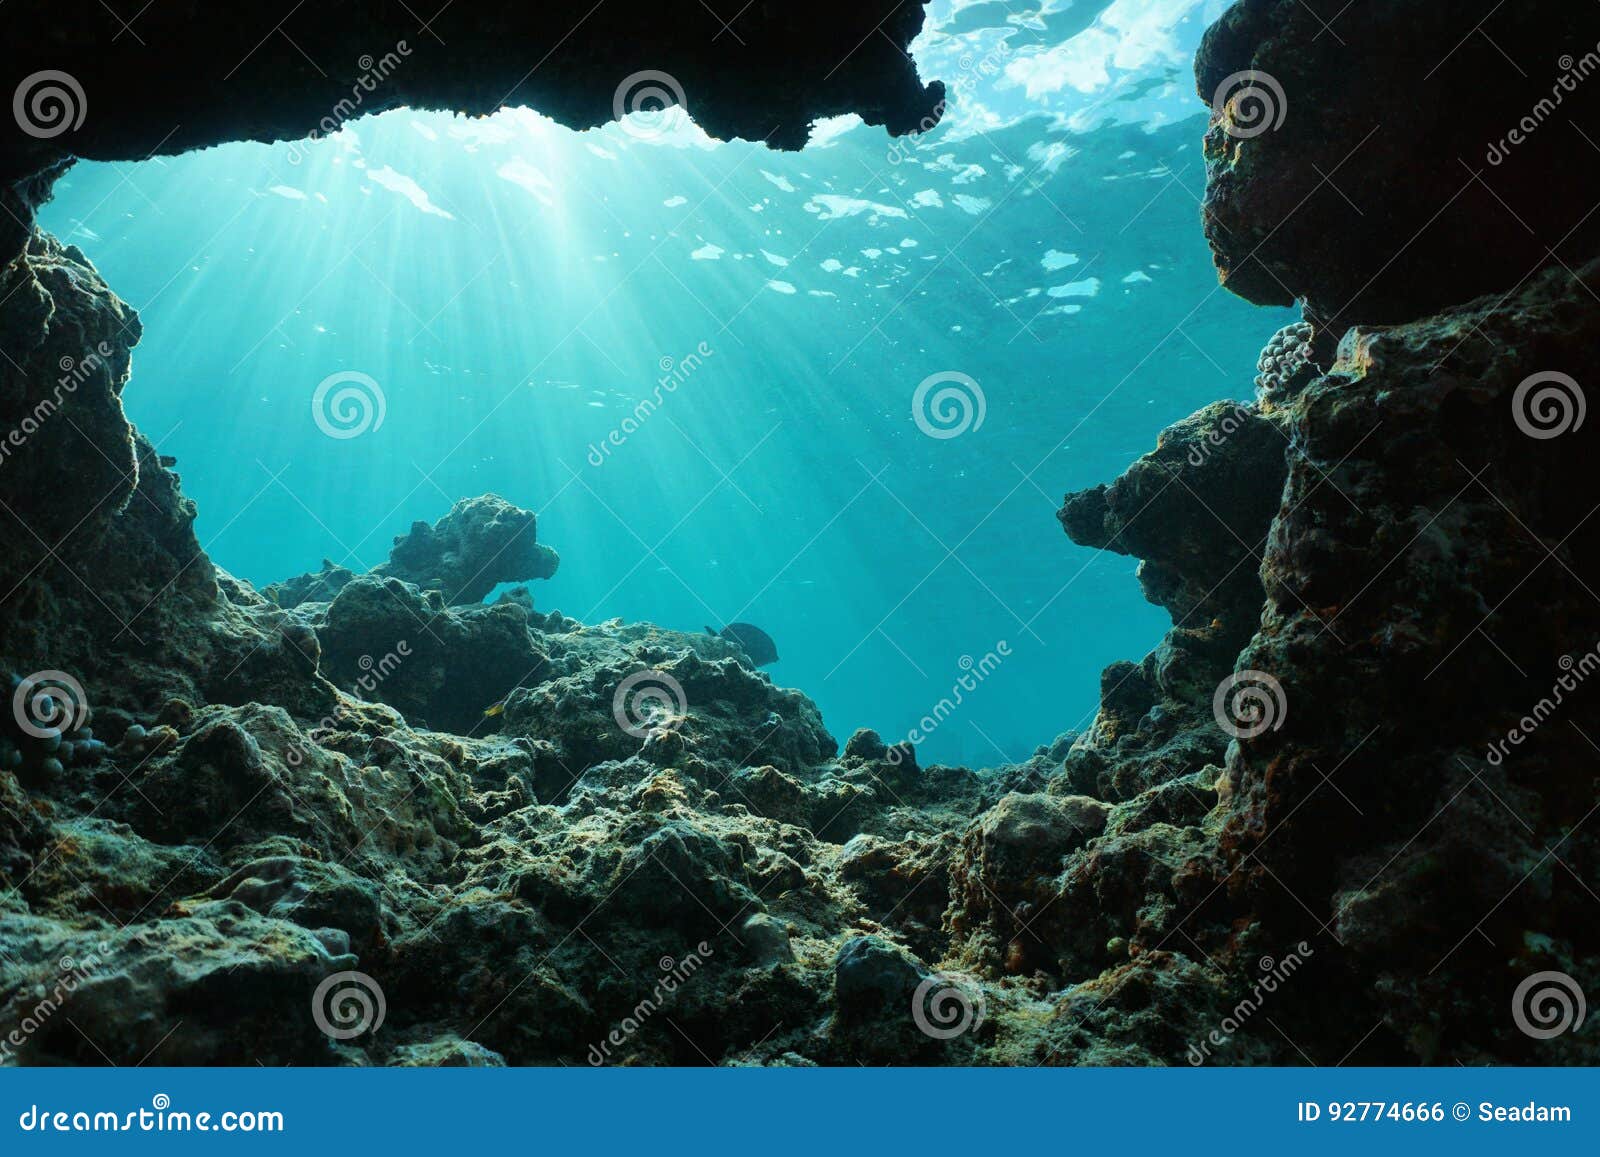 Underwater Sunlight From A Hole In The Ocean Floor Stock Photo